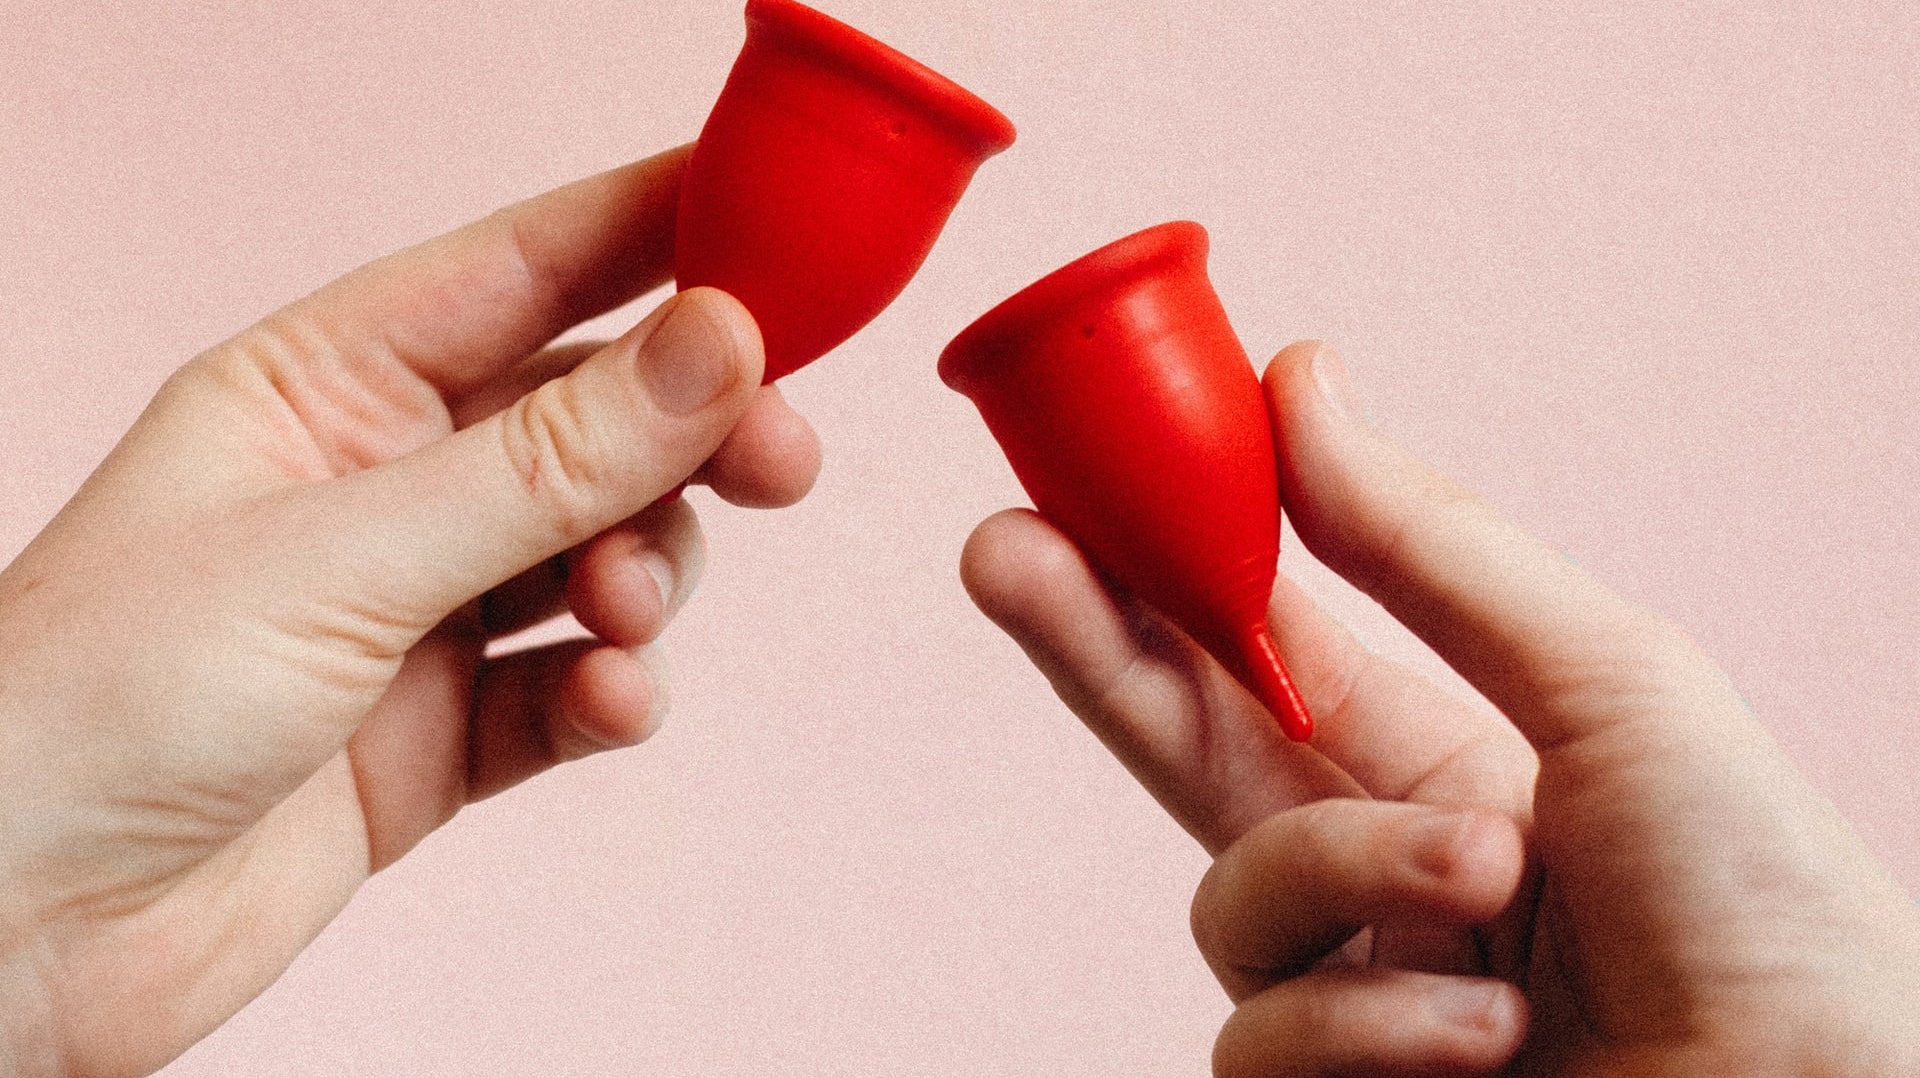 A Personal Review of the Menstrual Cup